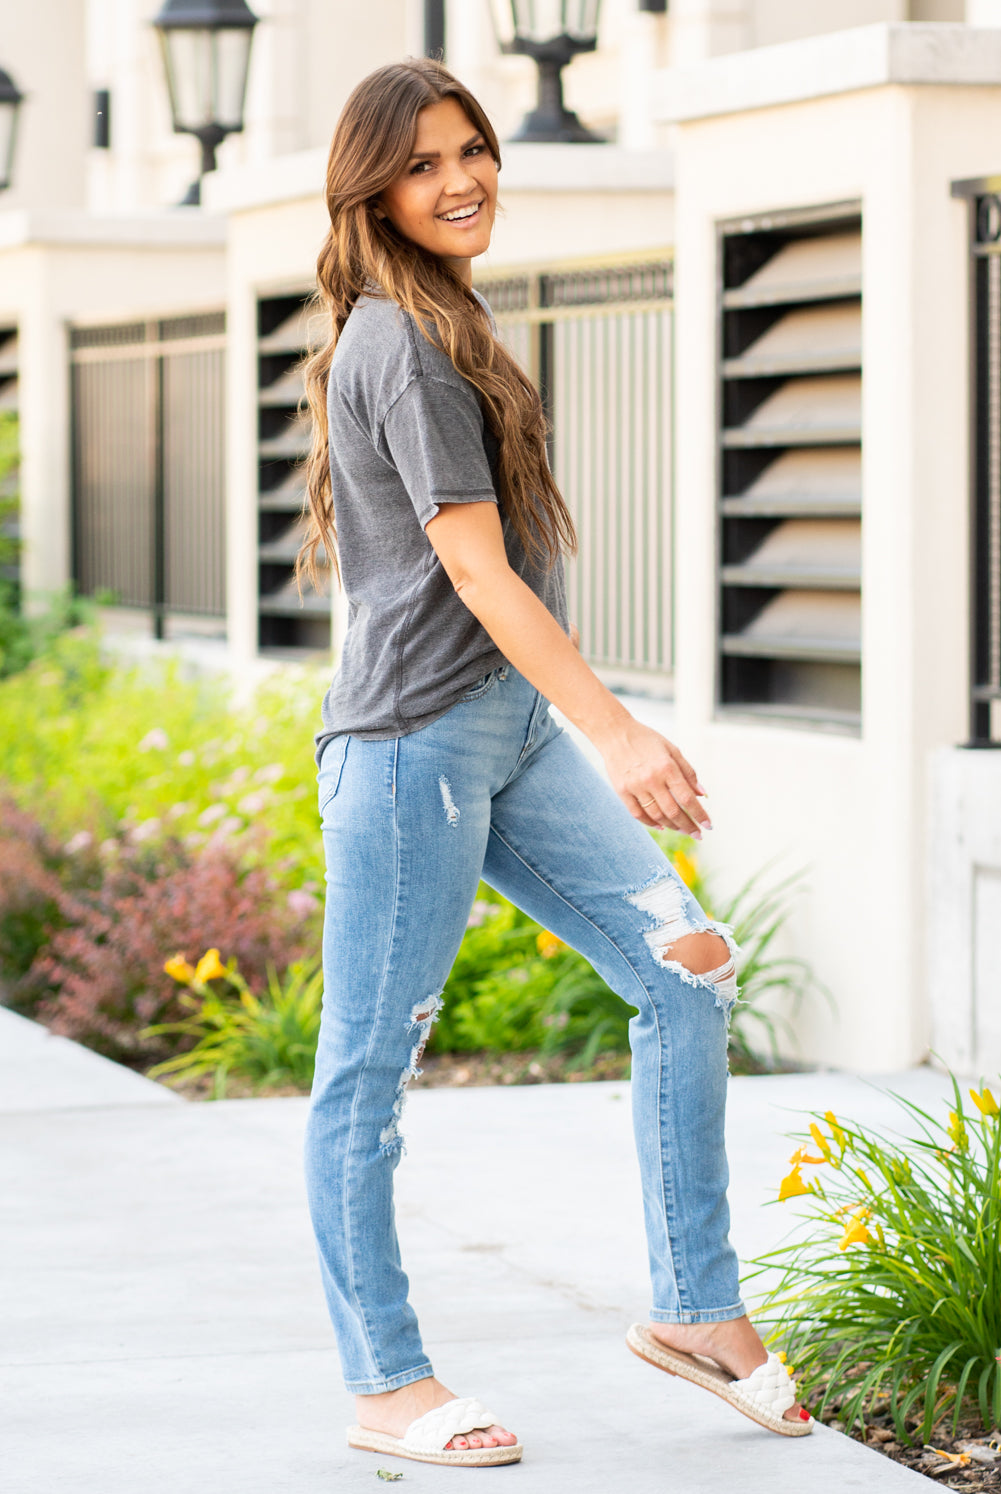 Sneak Peak Denim  These sneak peak jeans have all the right holes and a super cute relaxed leg fit.  Collection: Spring 2021 Tomboy Skinny Color: Medium Blue Cut: Flares, 29" Inseam Rise: High-Rise, 10.5" Front Rise 99% Cotton 1% Spandex Fly: Zipper  Style #: SP-P11601 Contact us for any additional measurements or sizing.